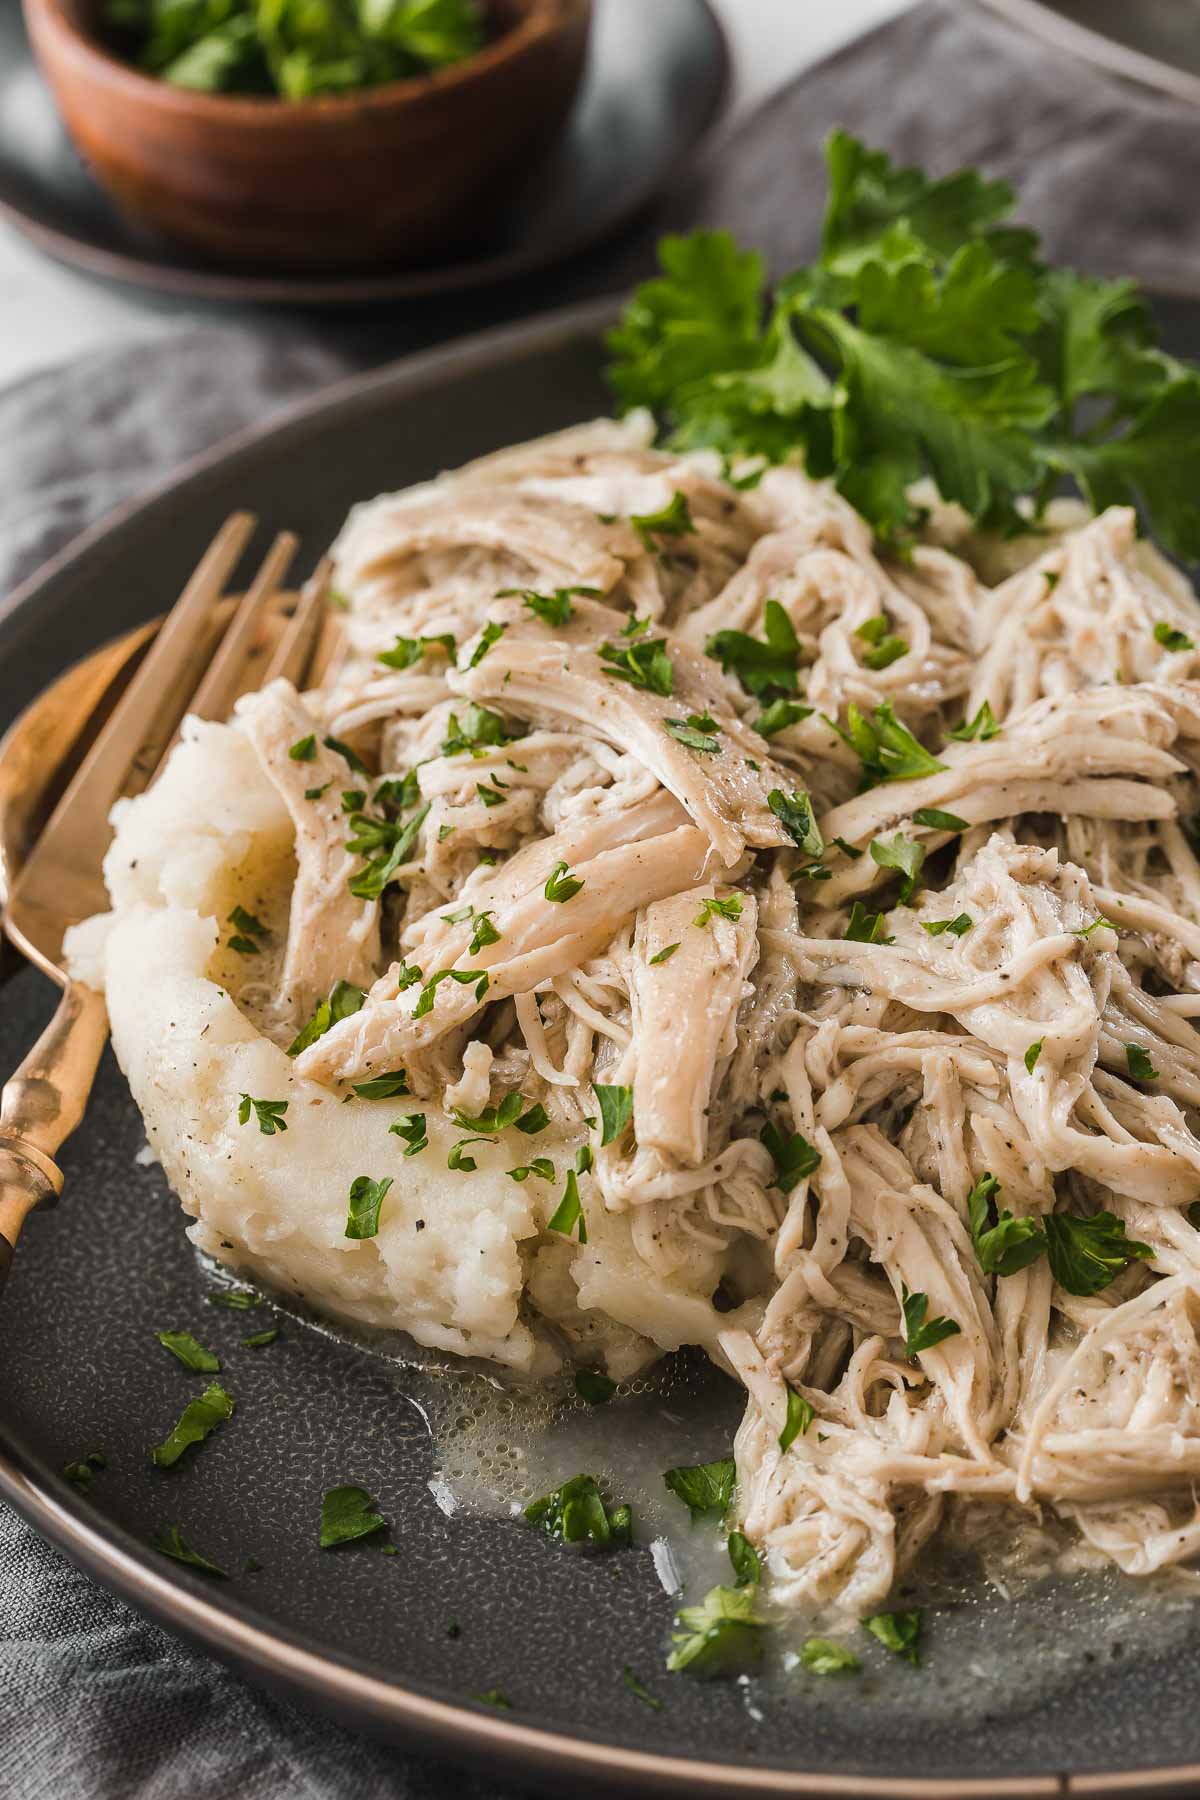 Grey plate with shredded chicken over mashed potatoes.